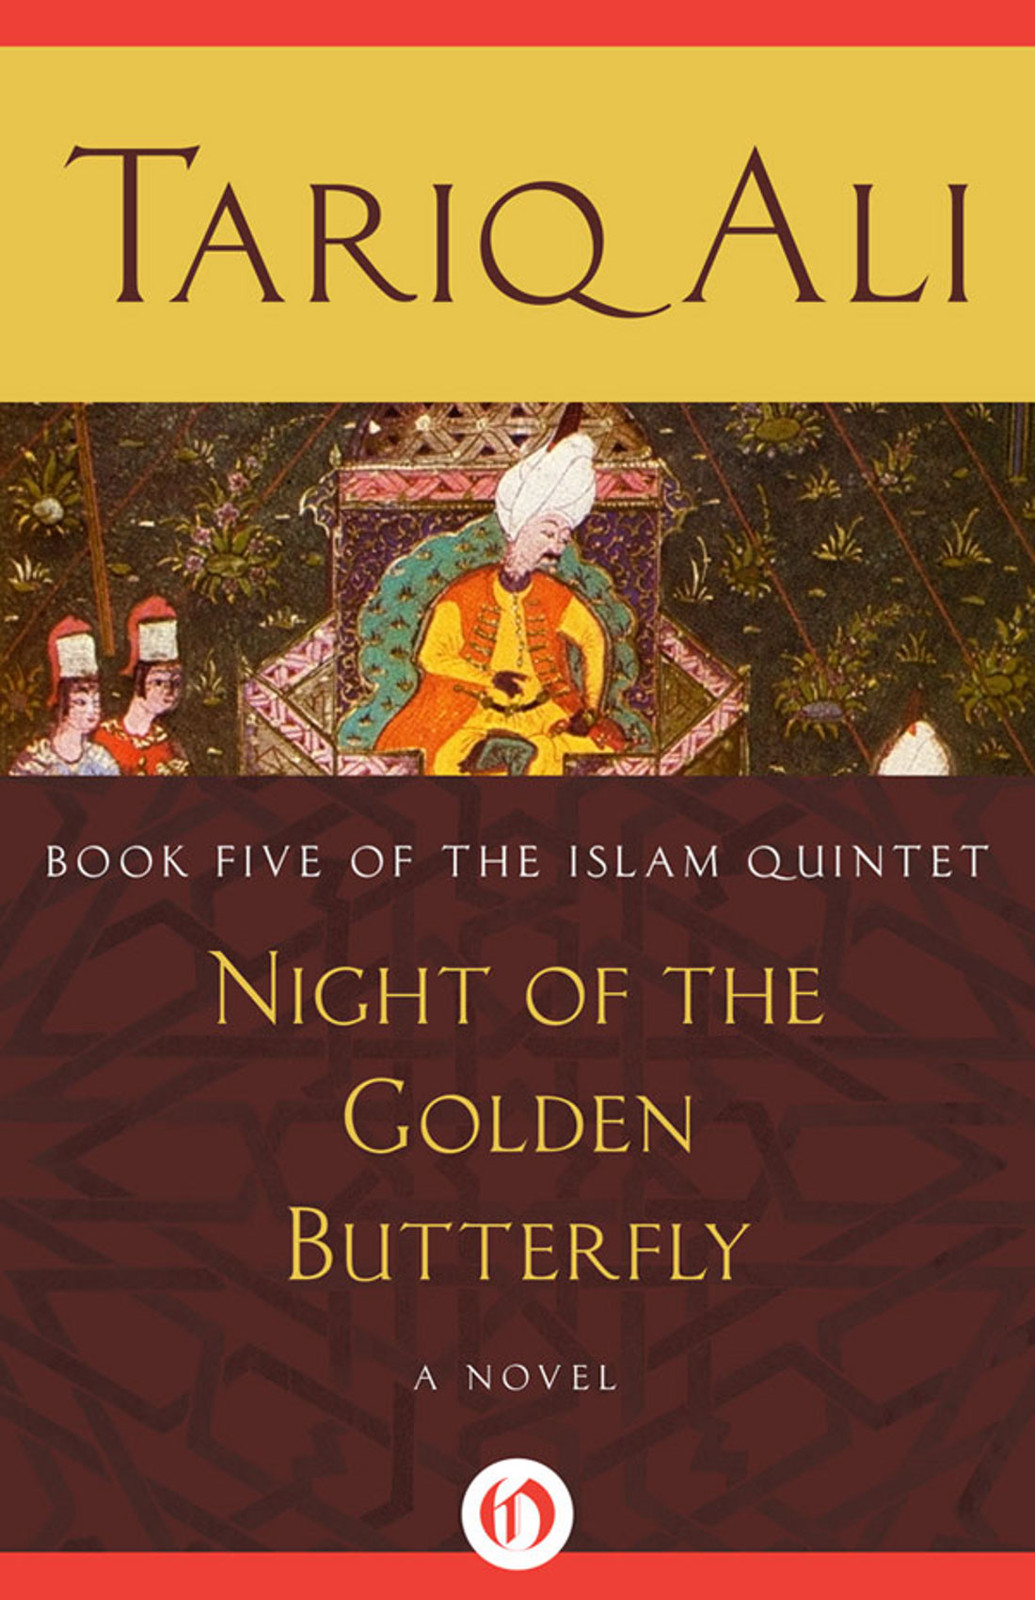 Night of the Golden Butterfly by Tariq Ali